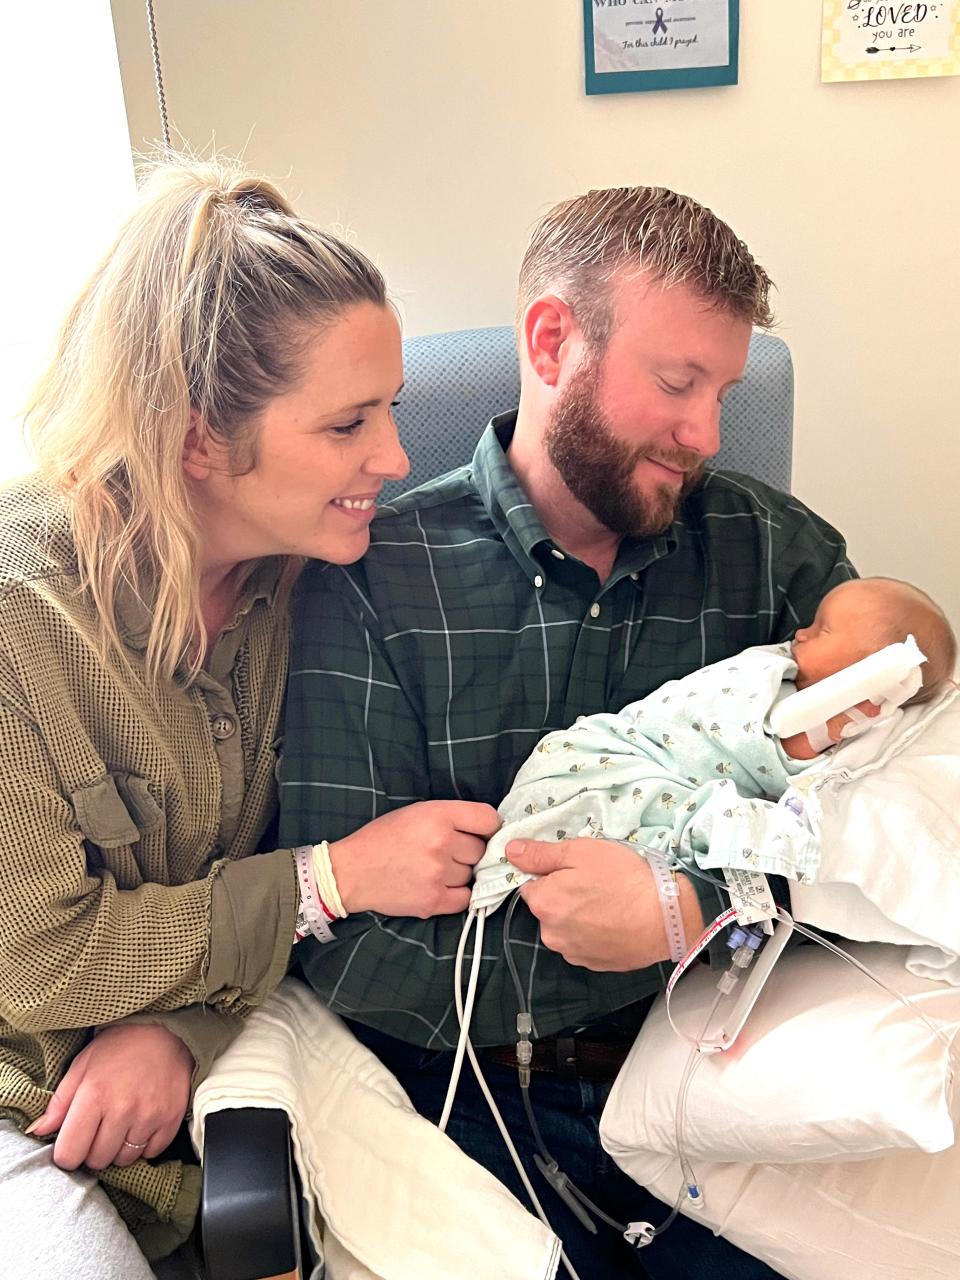 Parents Katie and Jared Givens of Madisonville, Tennessee, happily hold their newborn son, Grady, who was born six weeks early with neonatal onset multisystem inflammatory disease, or NOMID.